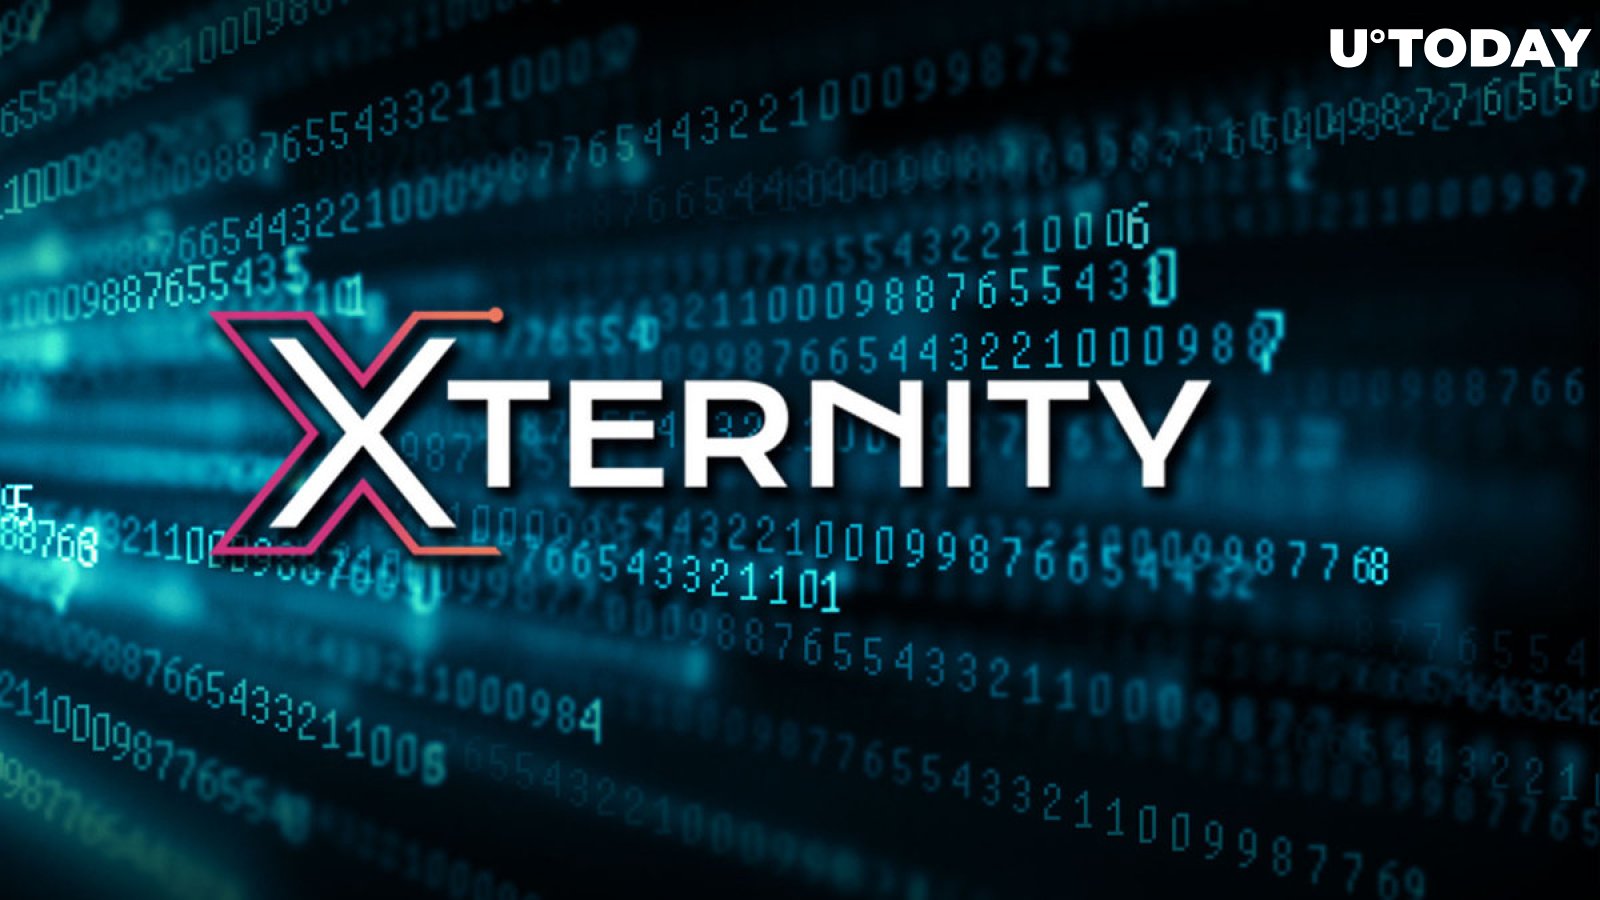 Xternity Web3 Gaming Platform Secures $4.5 Million, Launches Open Beta